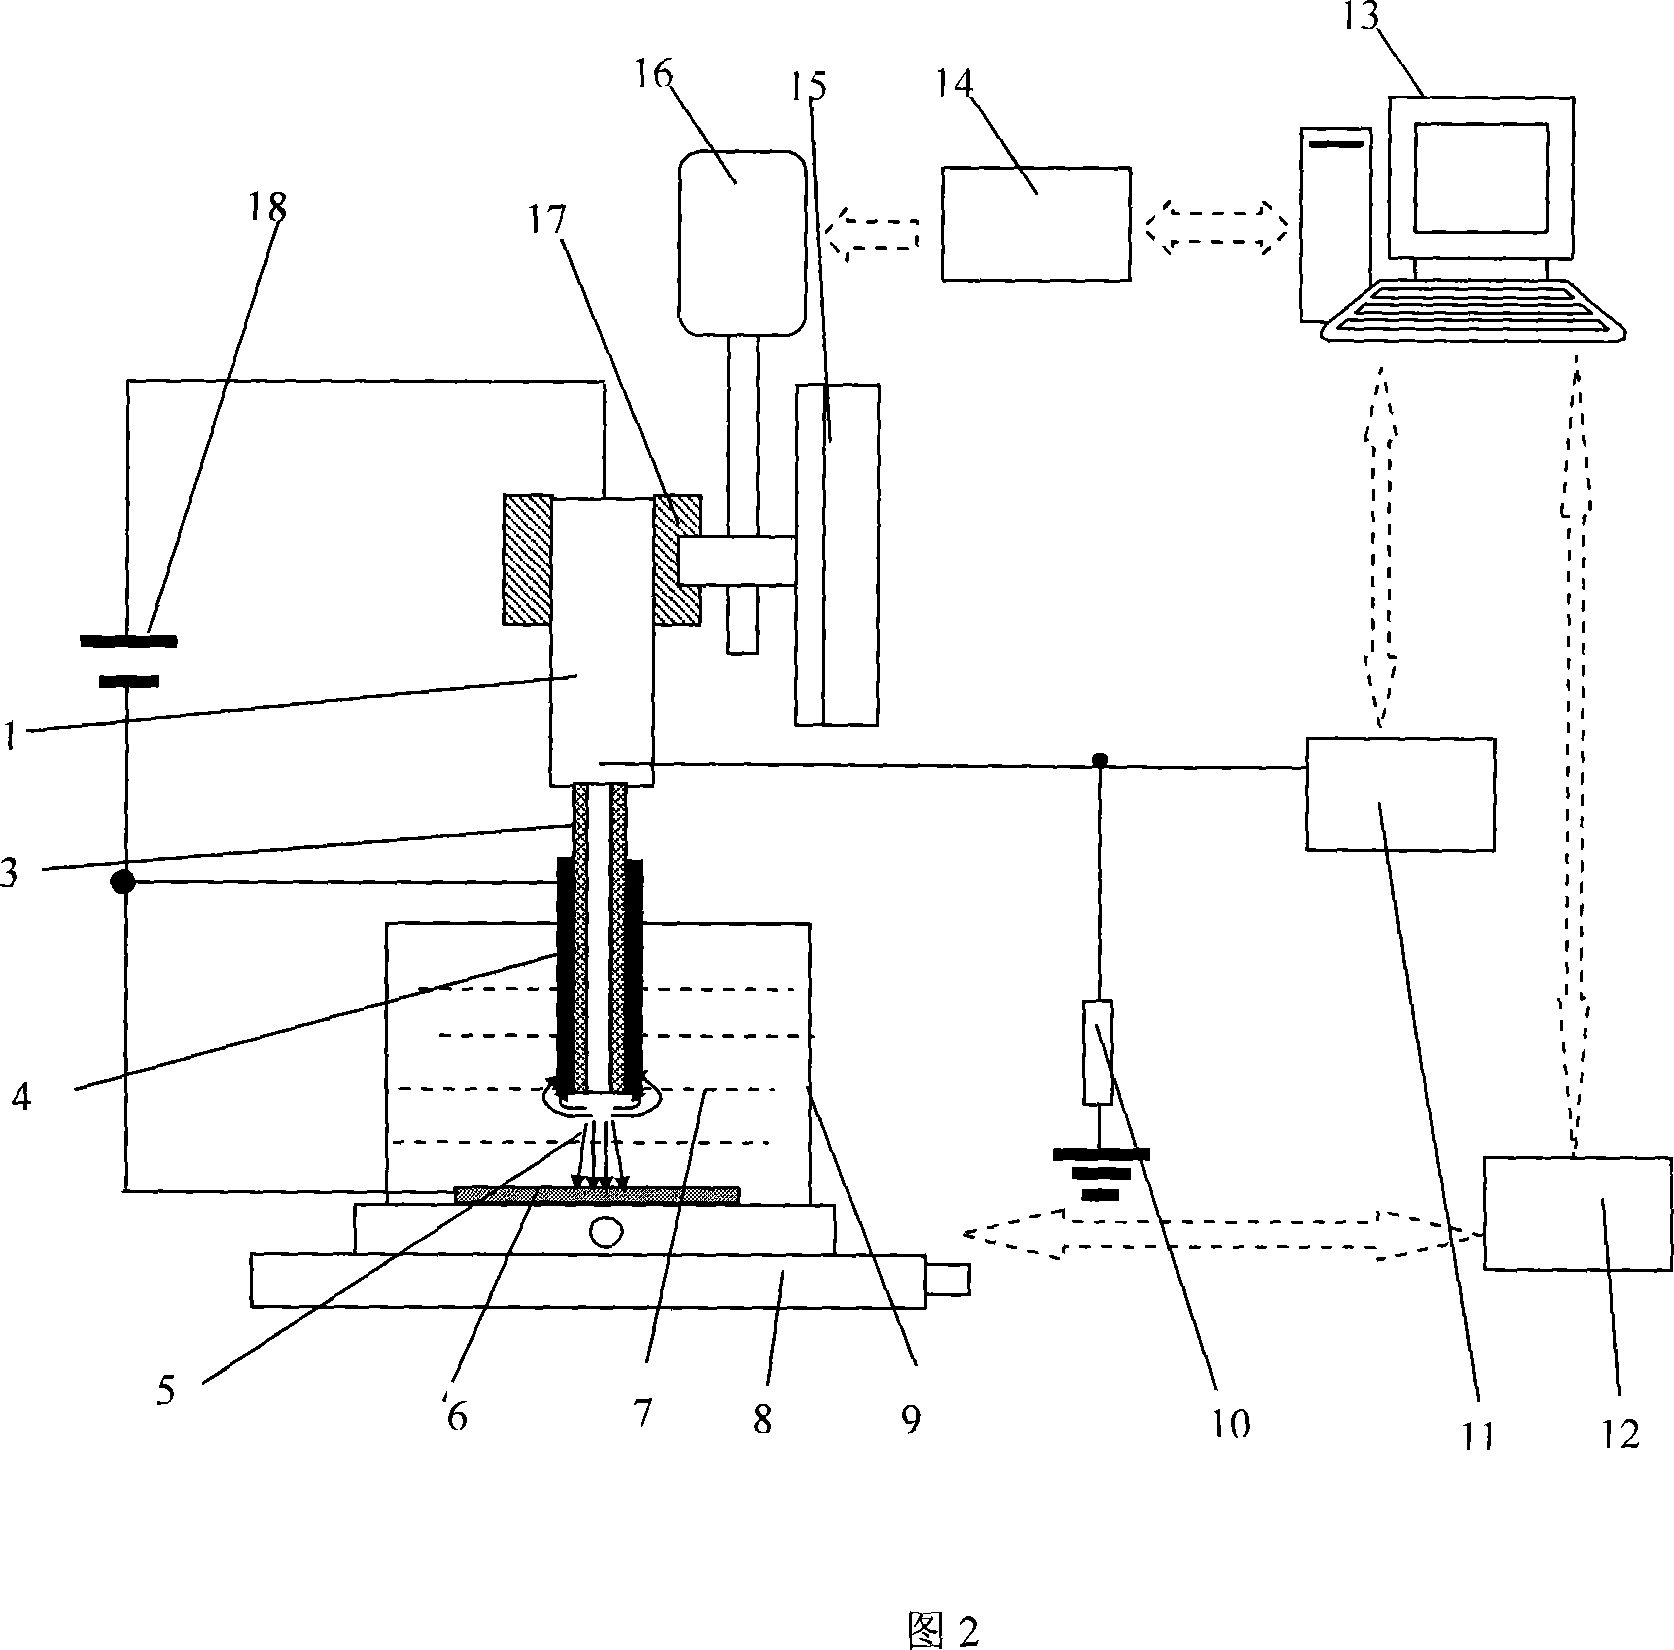 Electrochemical depositer with inductive anode